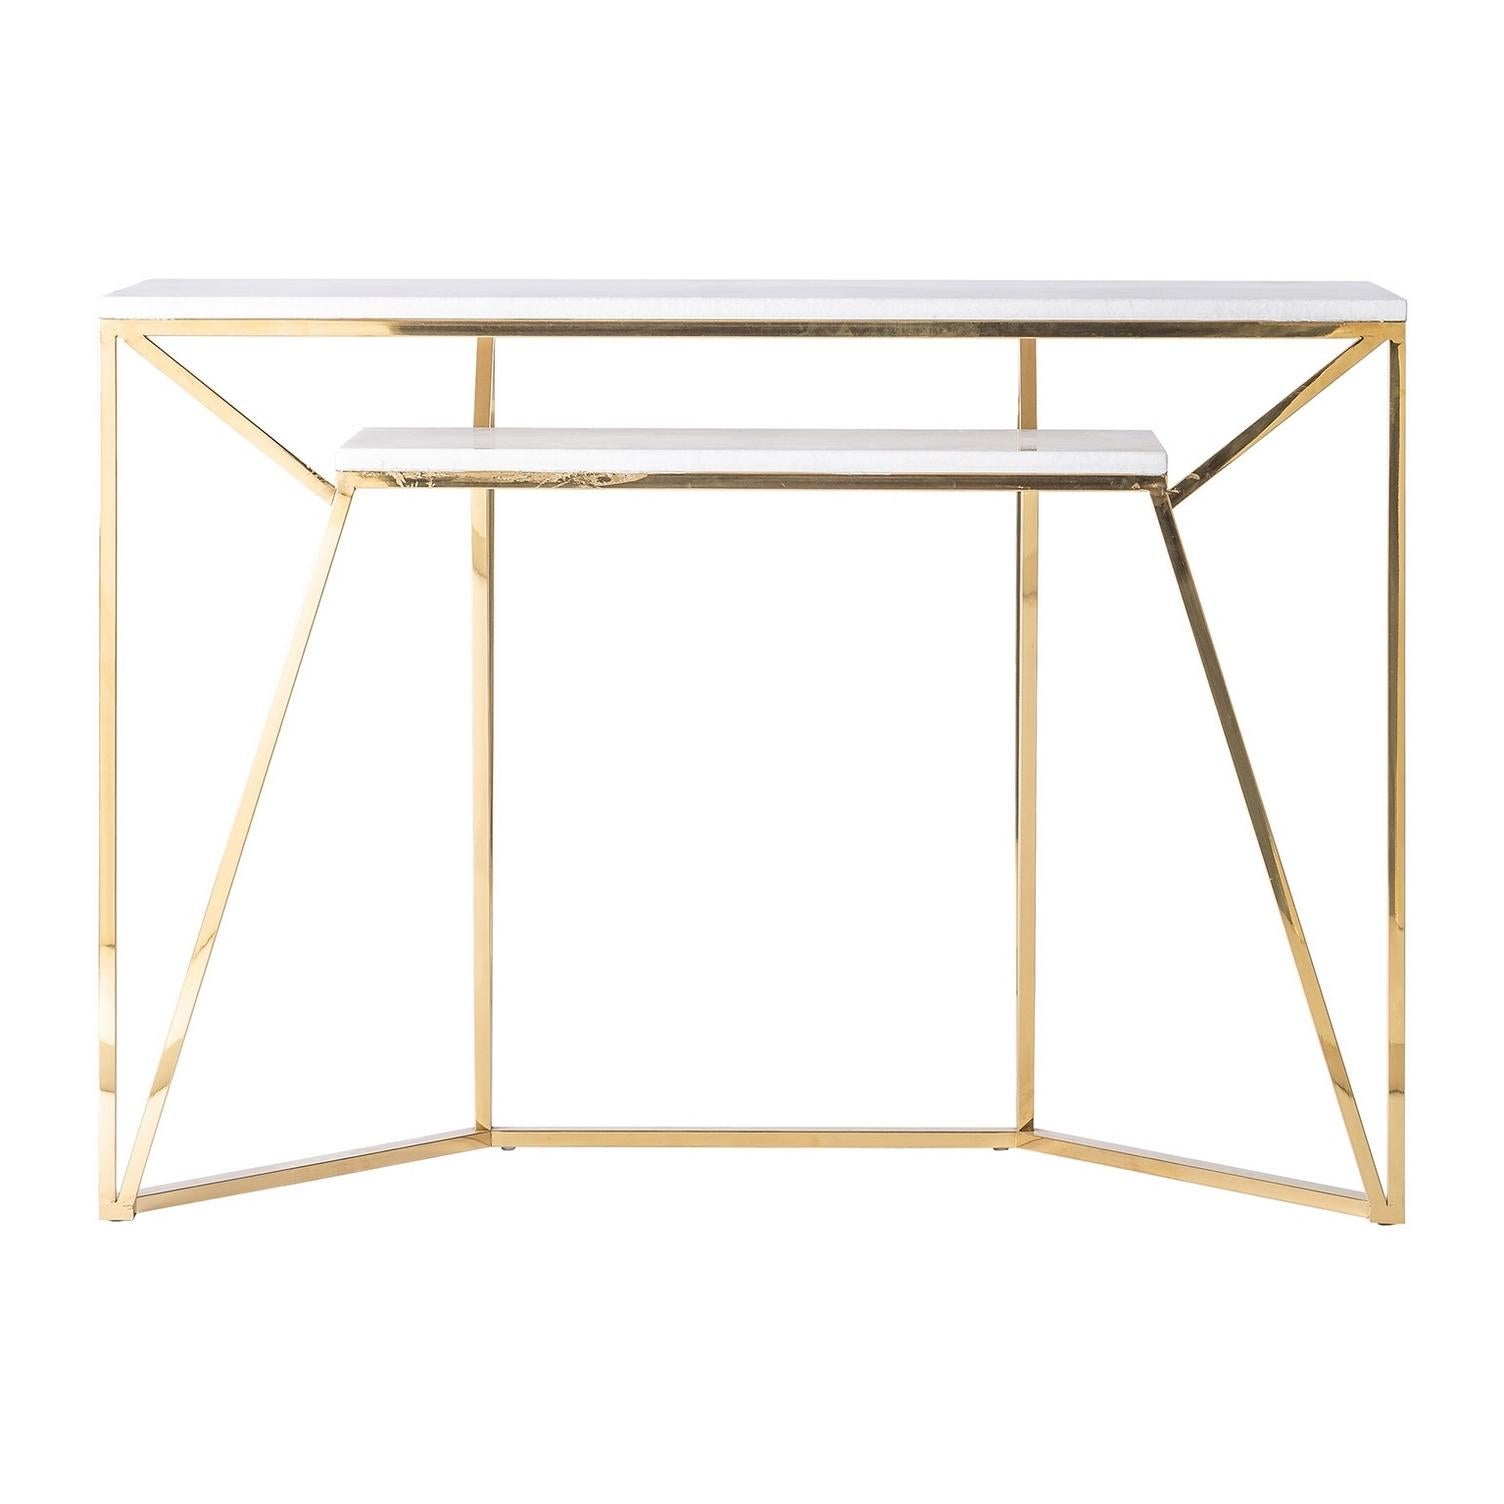 Two tier white marble and gold stainless steel rectangular console table. Perfect in your entryway, you can use it as a writing table too!